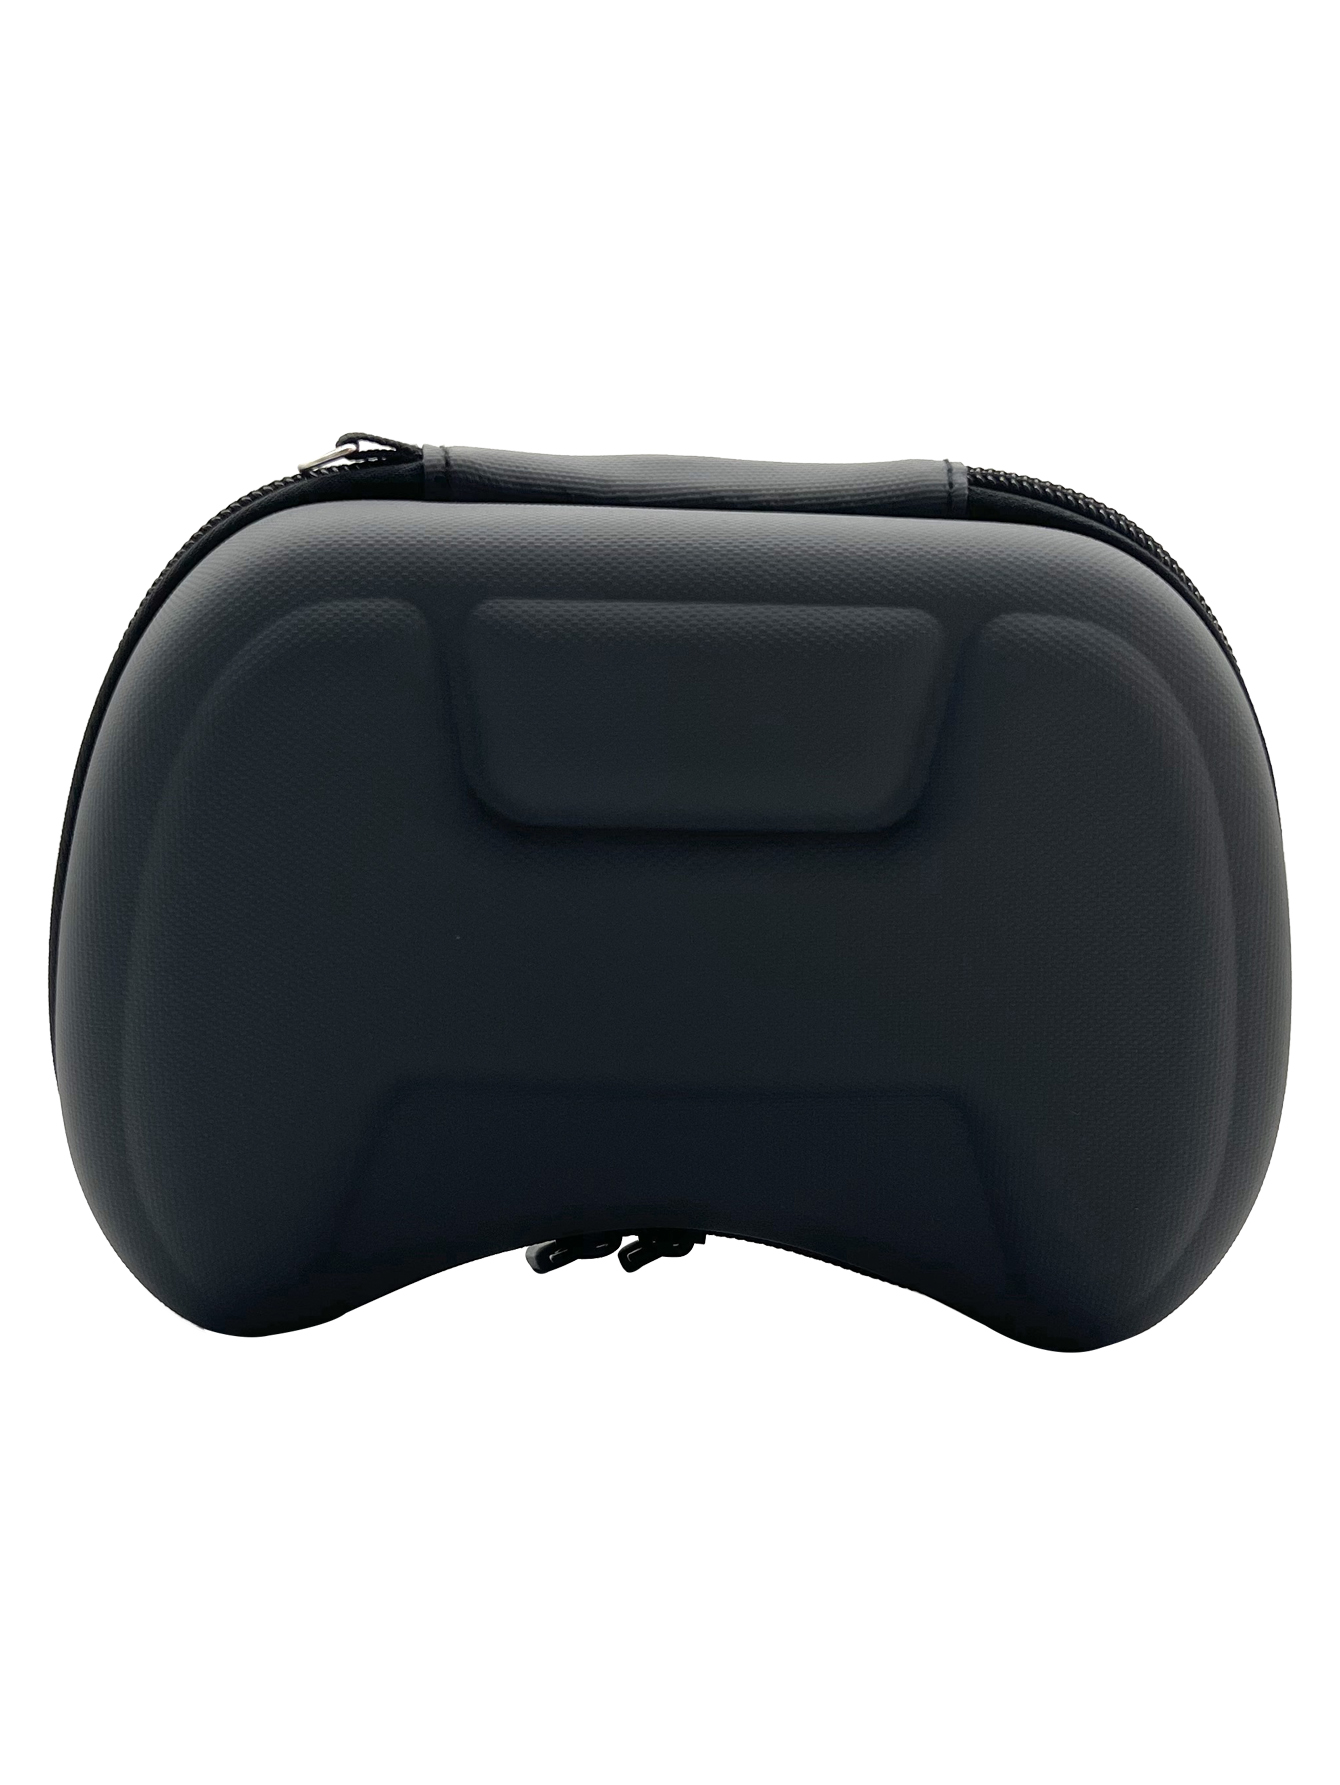 Manufacturer high quality EVA storage carrying case for Switch/Switch OLED Grip-con, Joypad, Joy-Cons